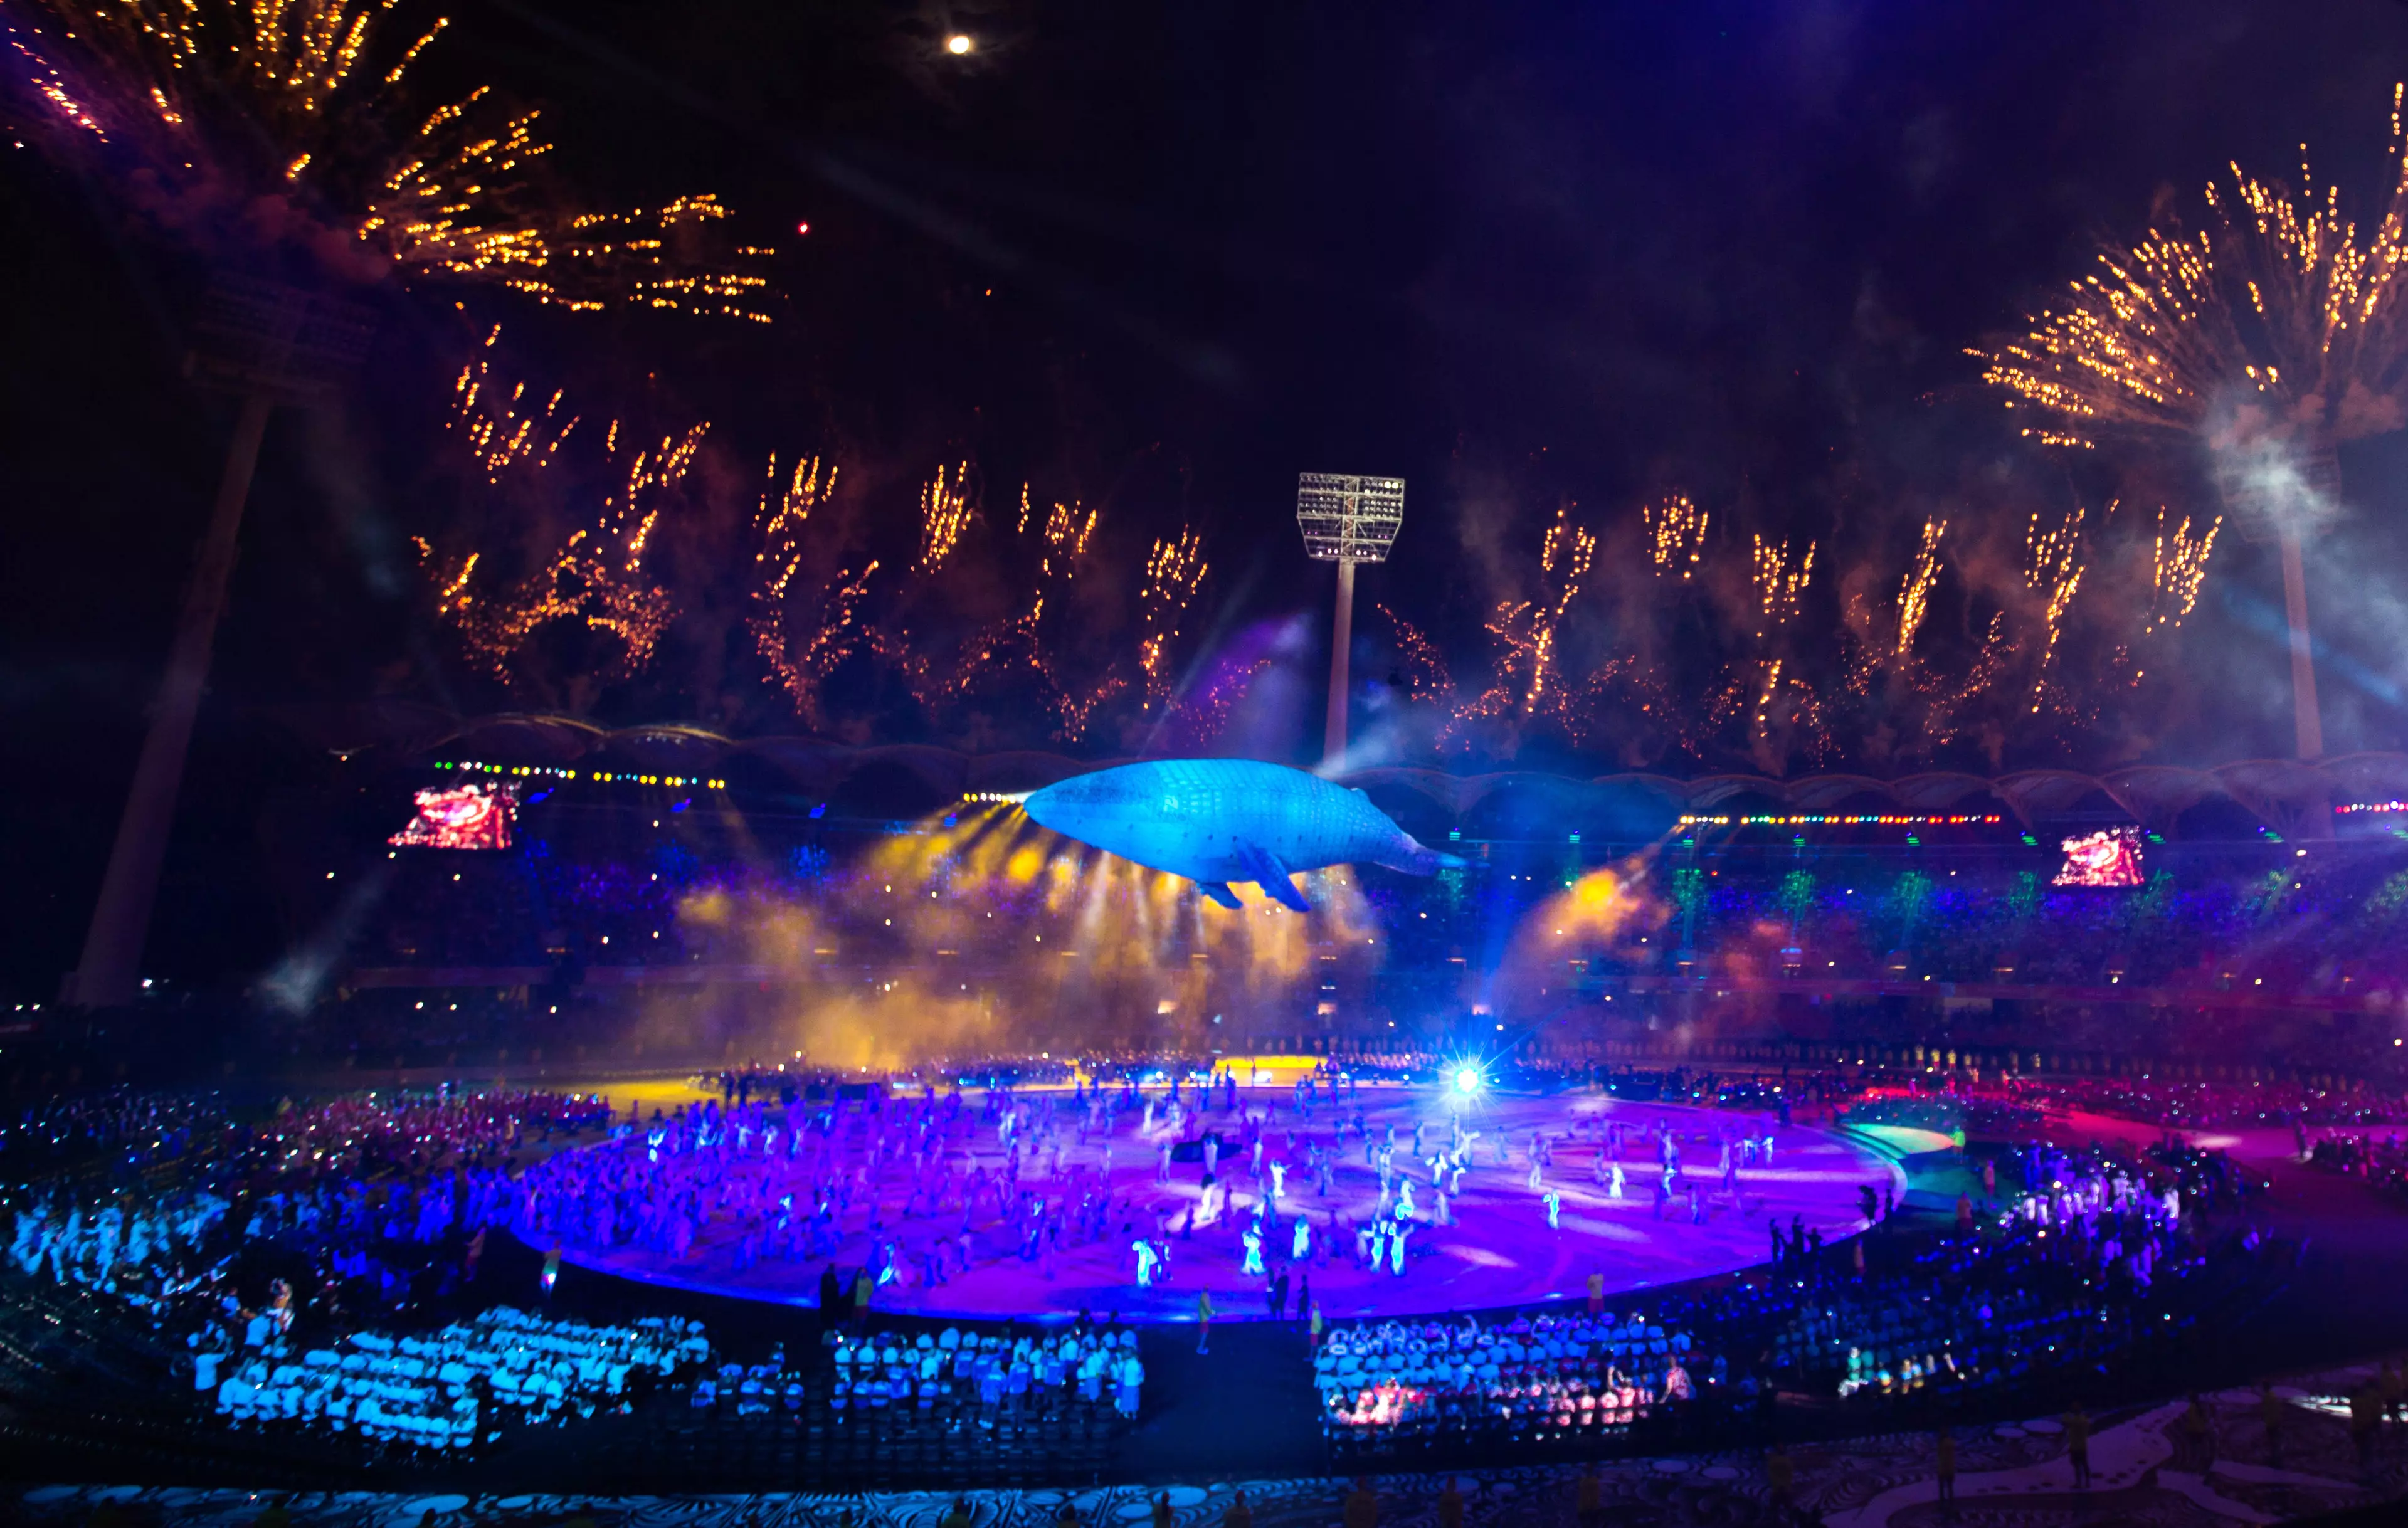 Gold Coast 2018 Commonwealth Games opening ceremony.